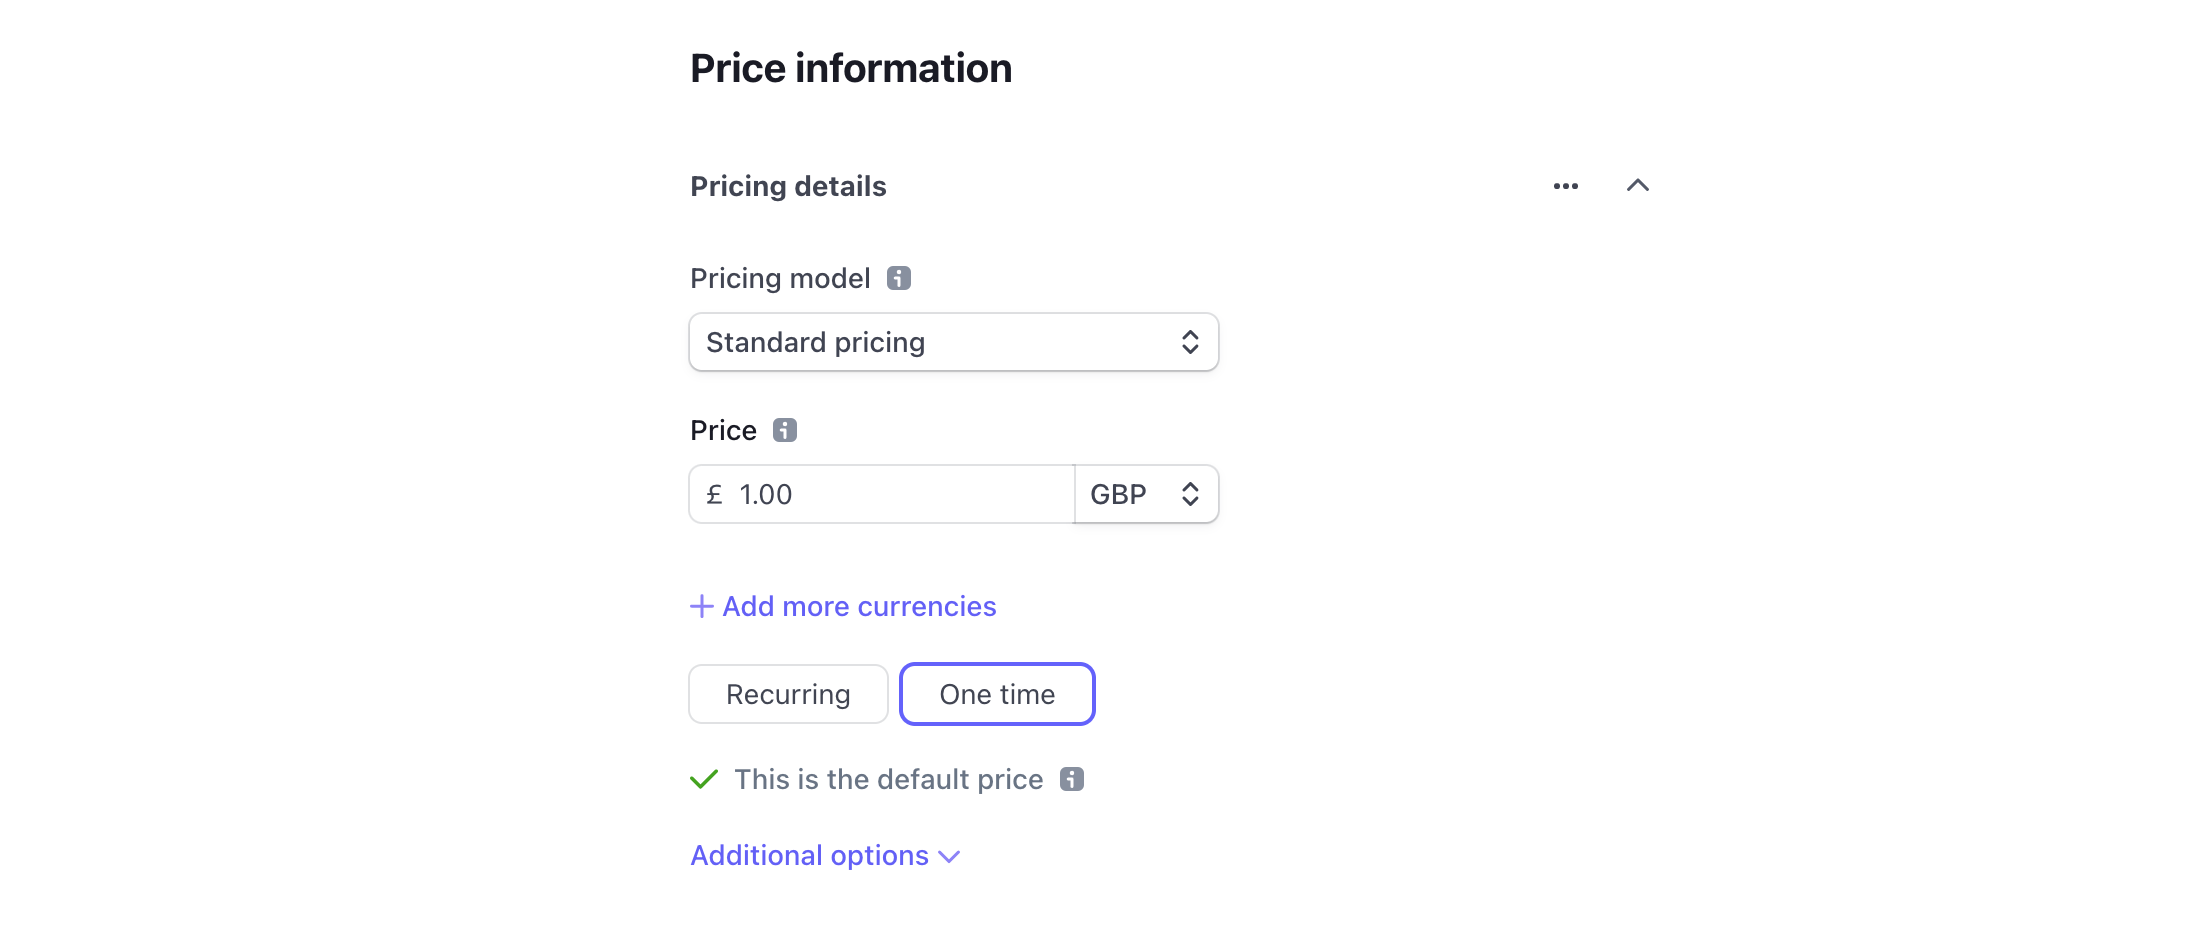 Screenshot of the Price information section of the screen. We have entered 1.00 as the price and selected "One time" as the type of payment.